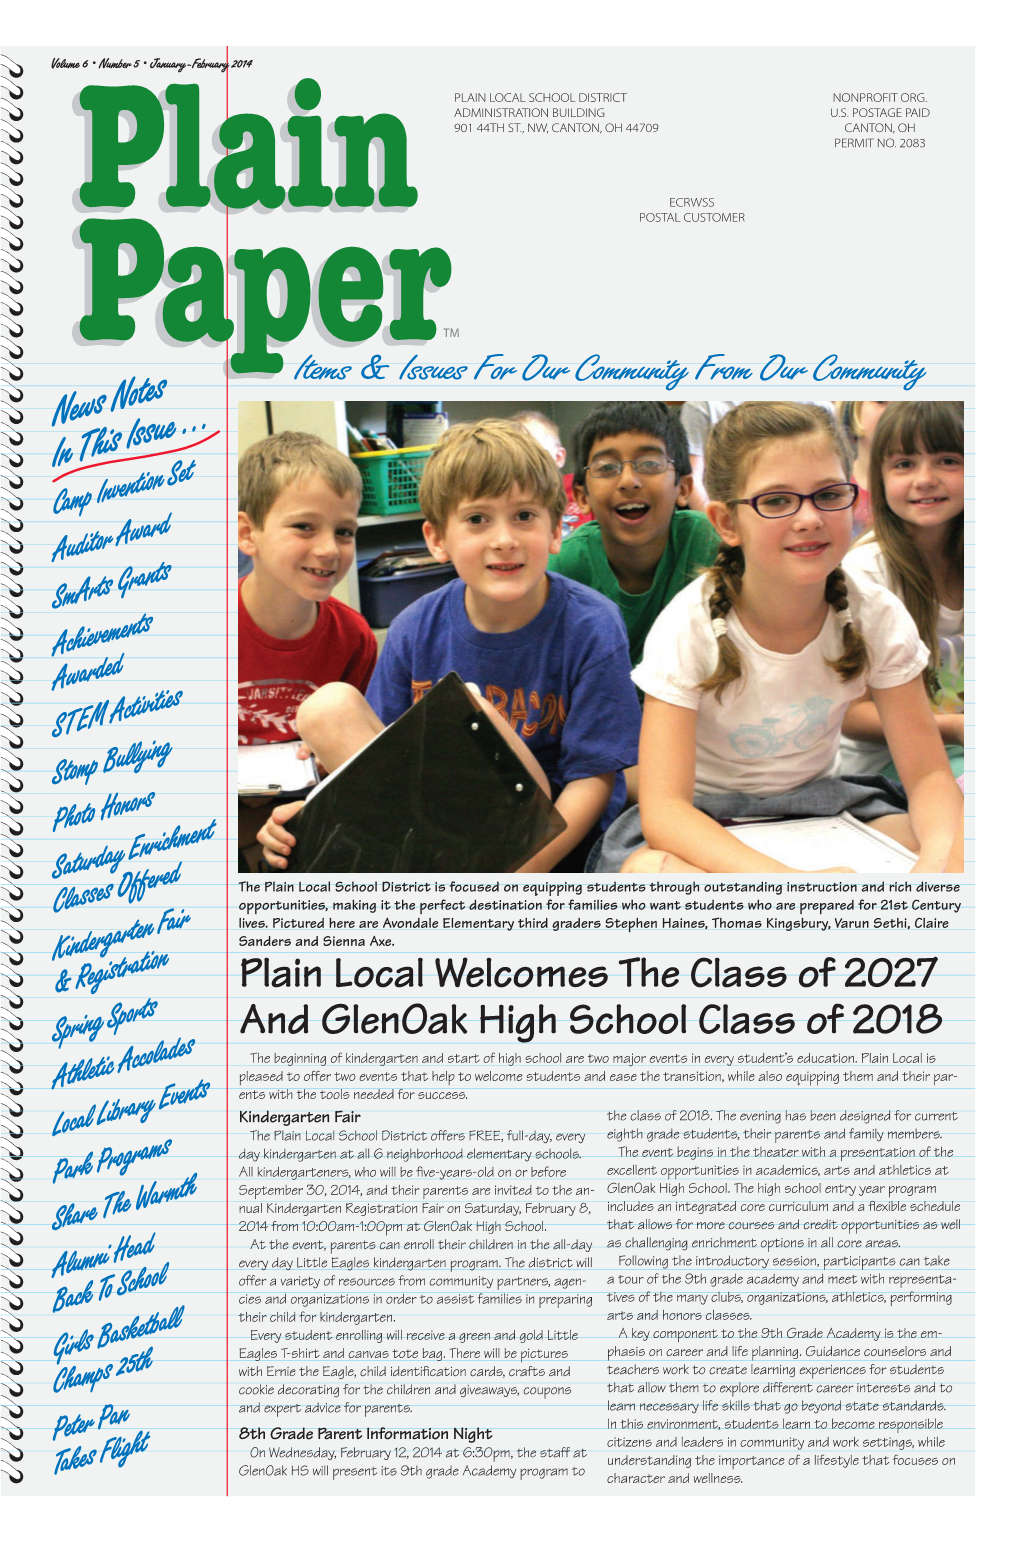 Plain Local Welcomes the Class of 2027 and Glenoak High School